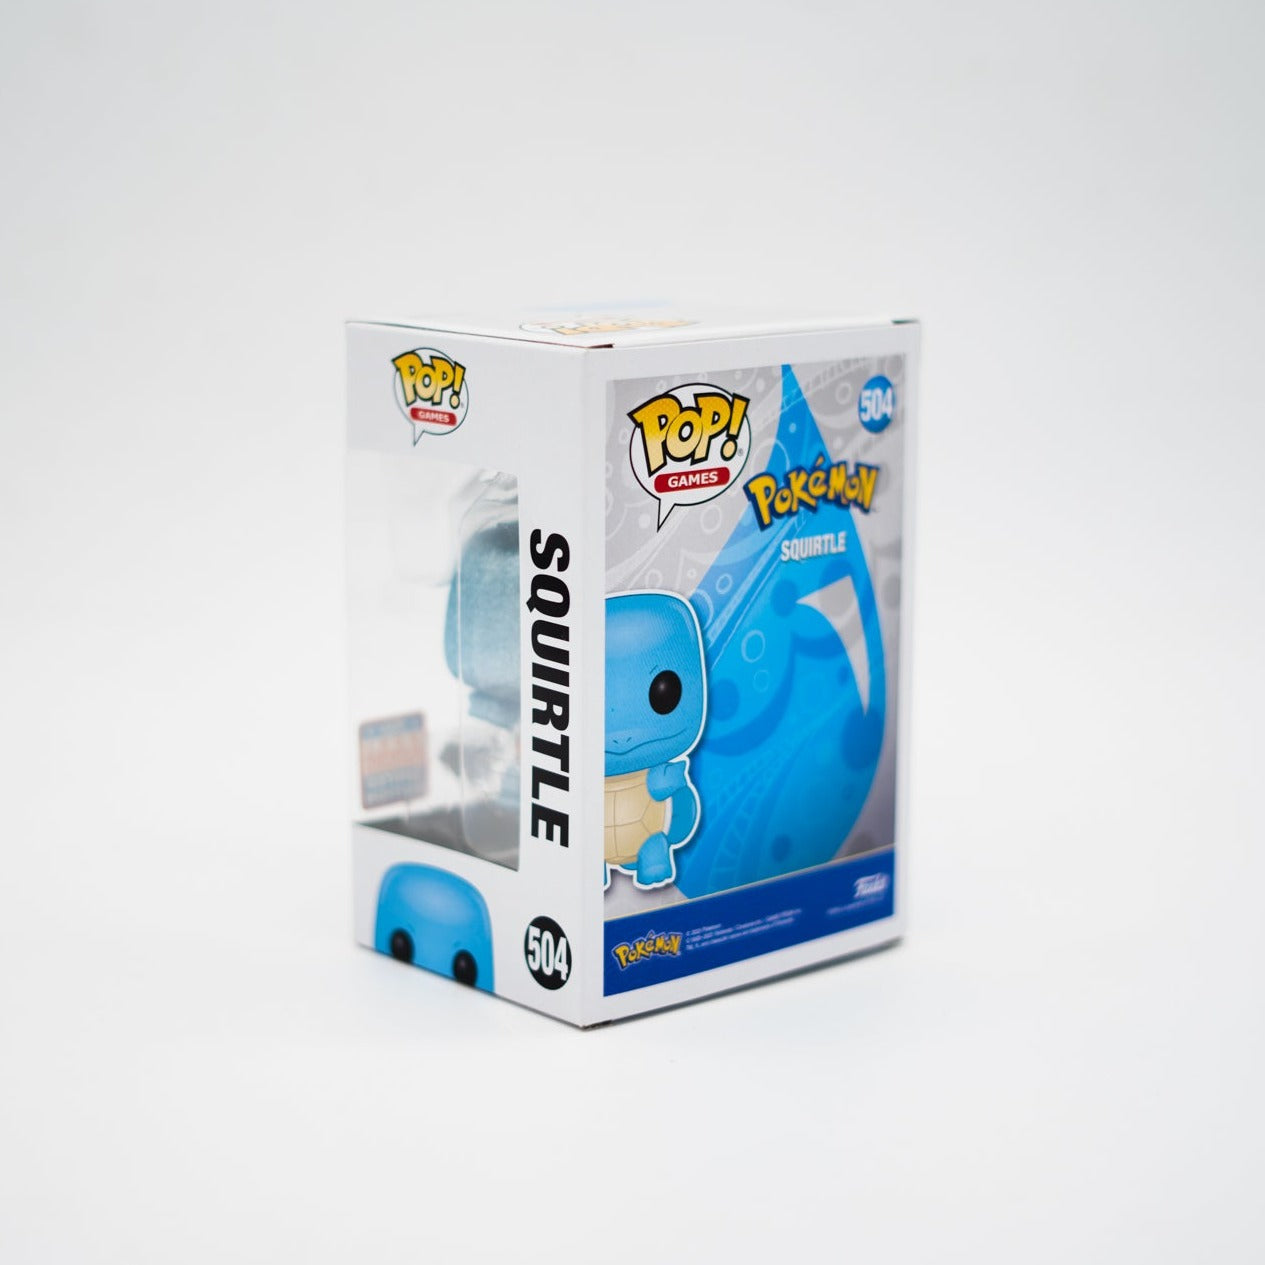 Funko Pop! Squirtle 504 Diamond 2021 Summer Convention Limited Edition